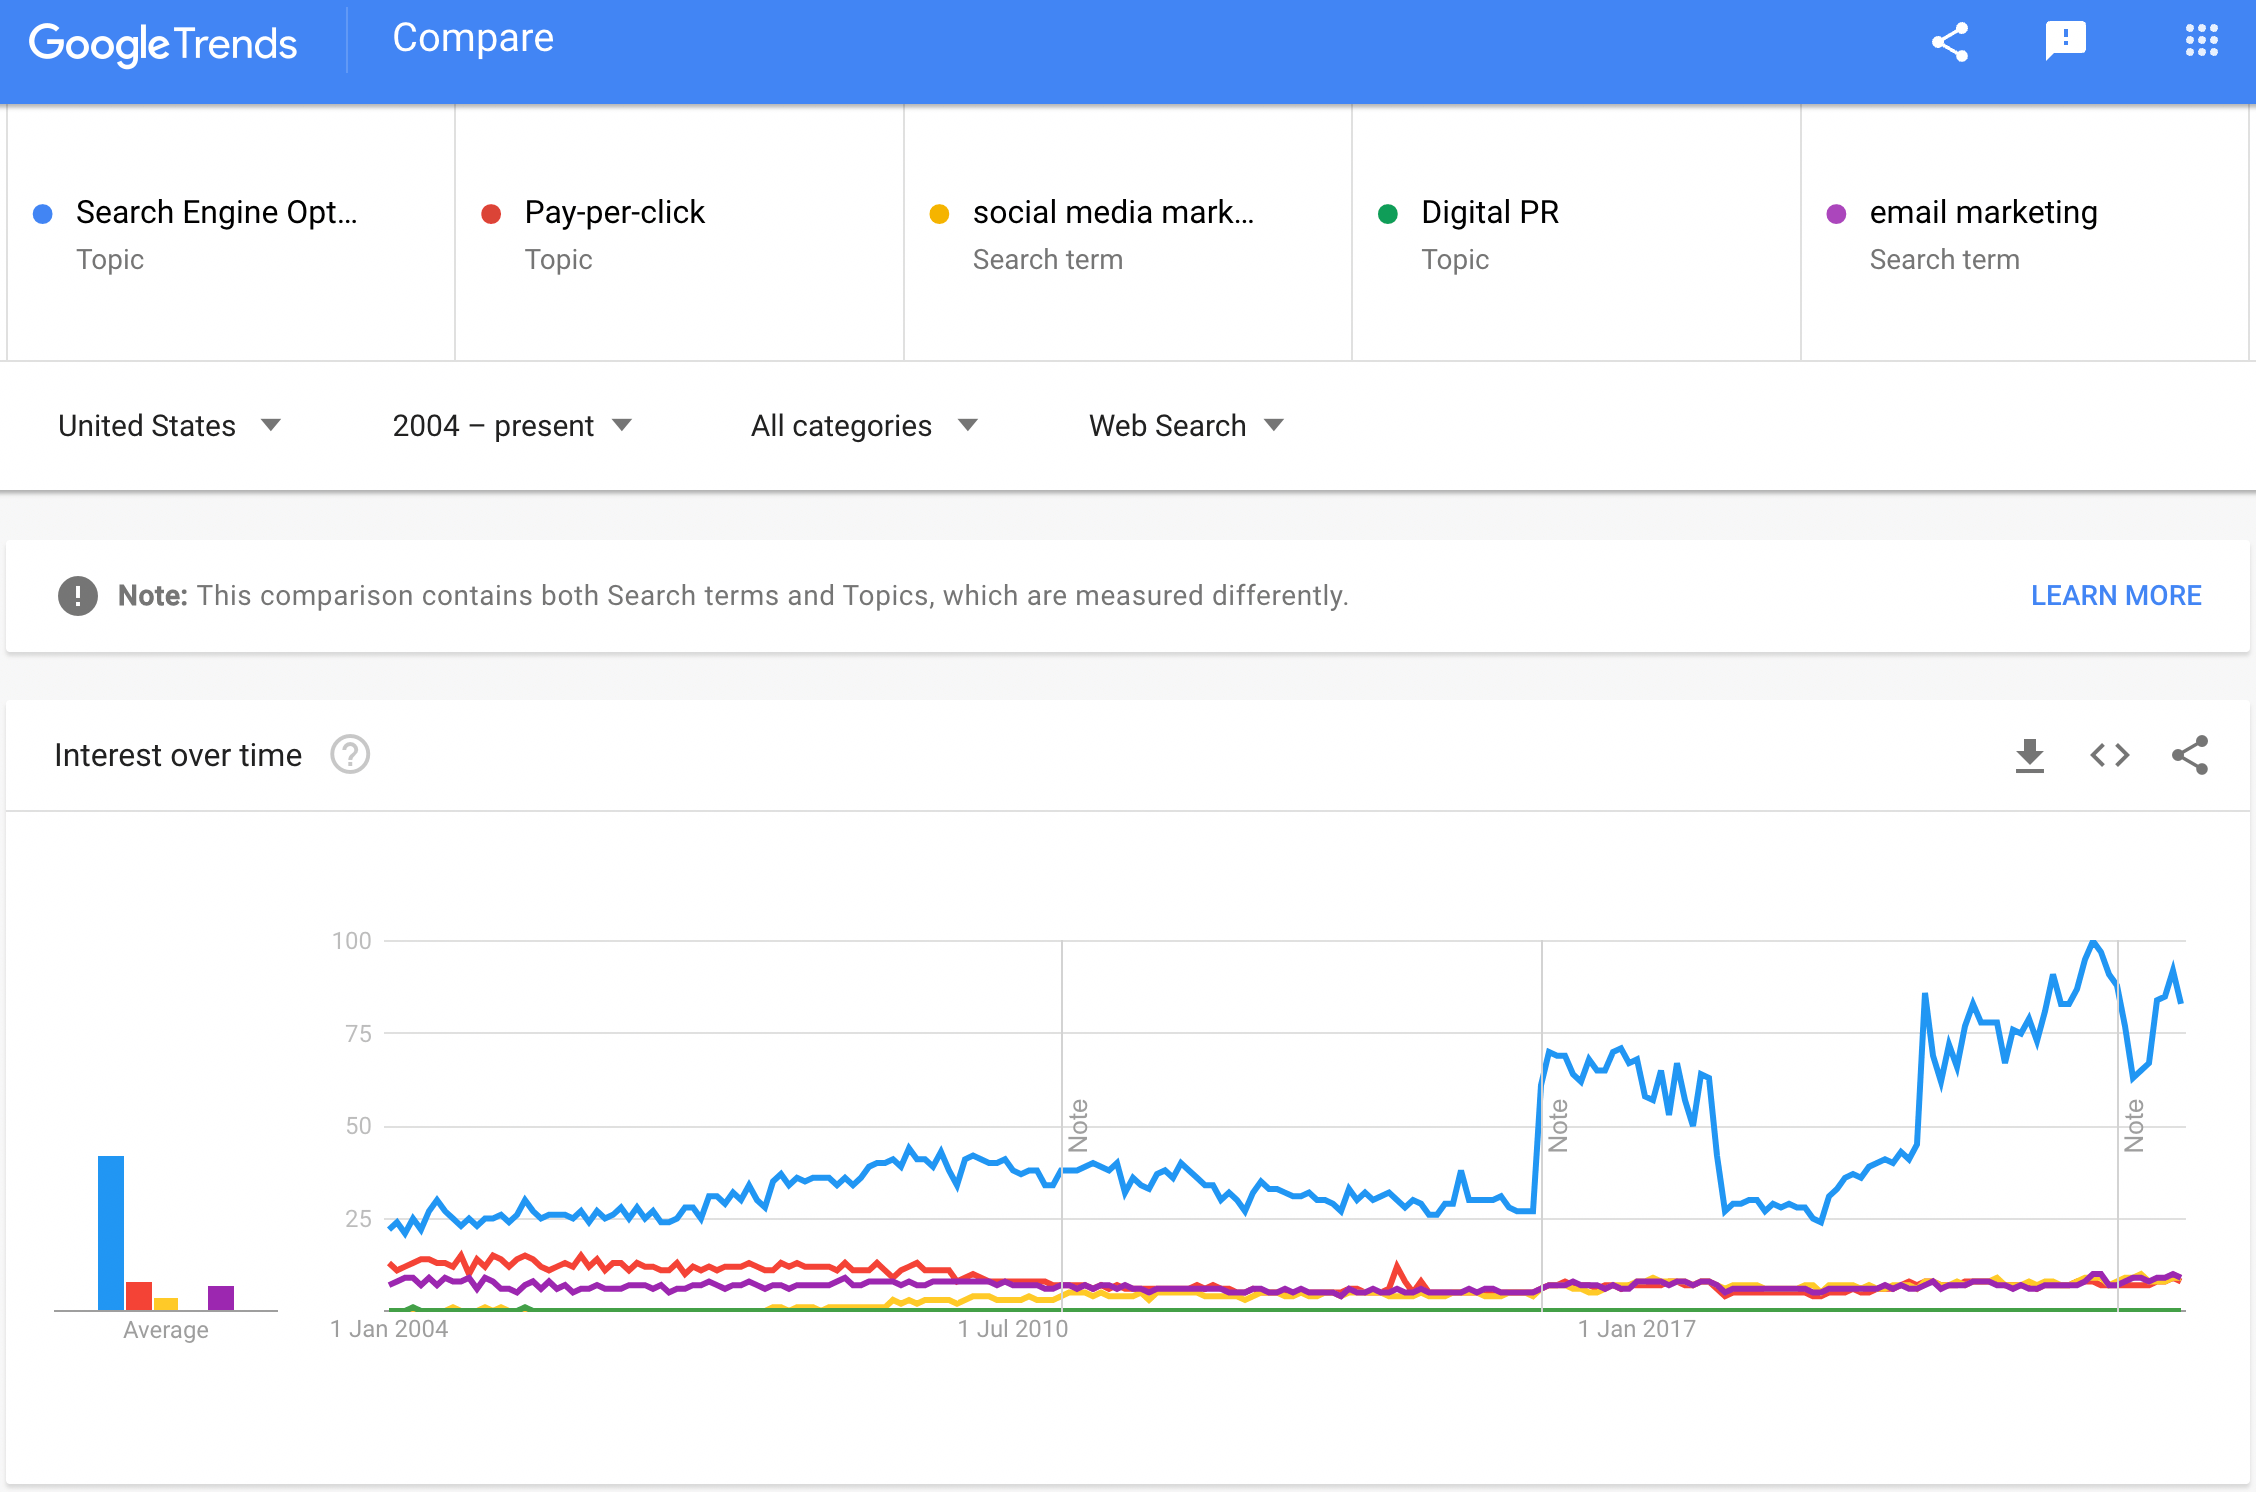 Google Trends comparing directional search popularity of topics of SEO versus pay-per-click, social media marketing, and email marketing.